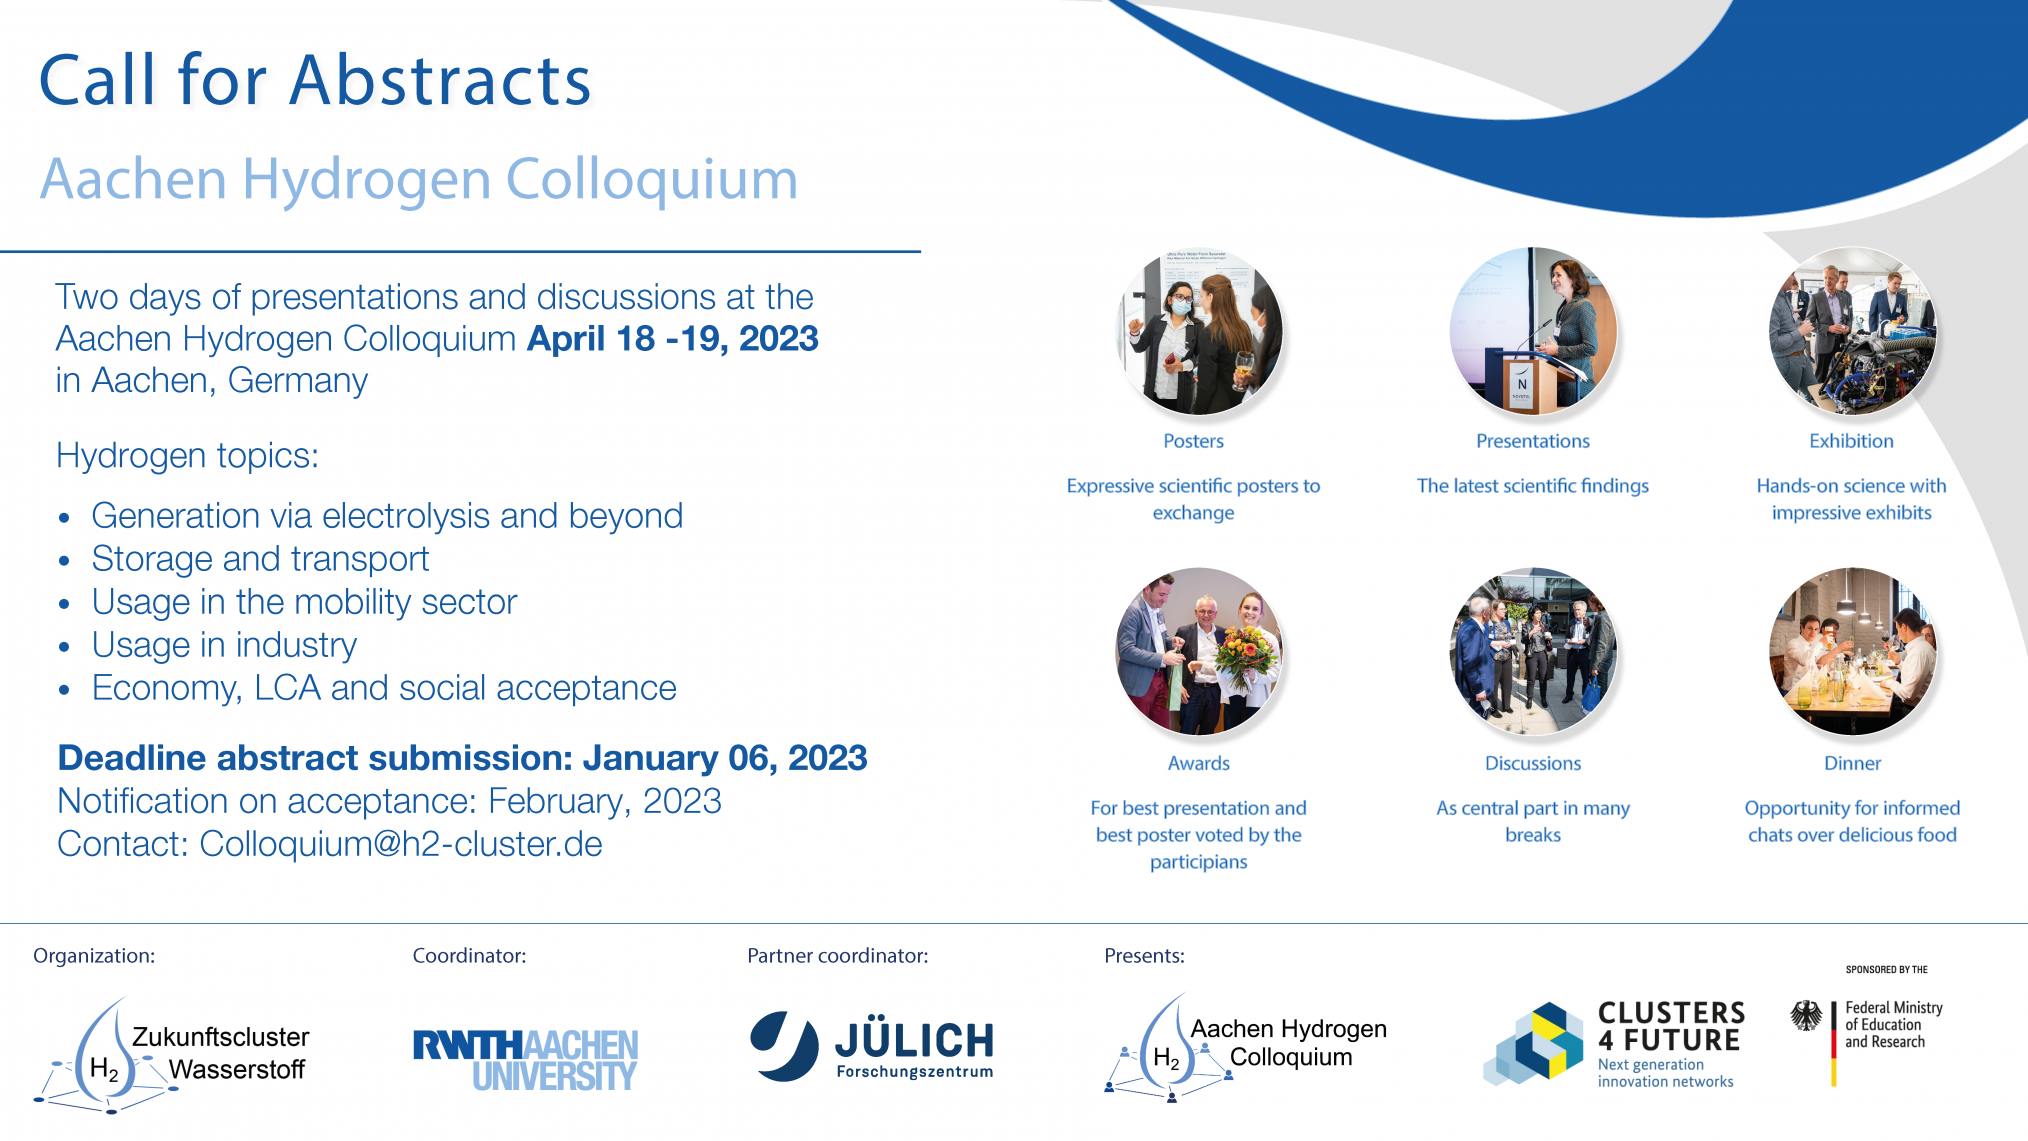 Aachen Hydrogen Colloquium 2023 – Call for Abstracts